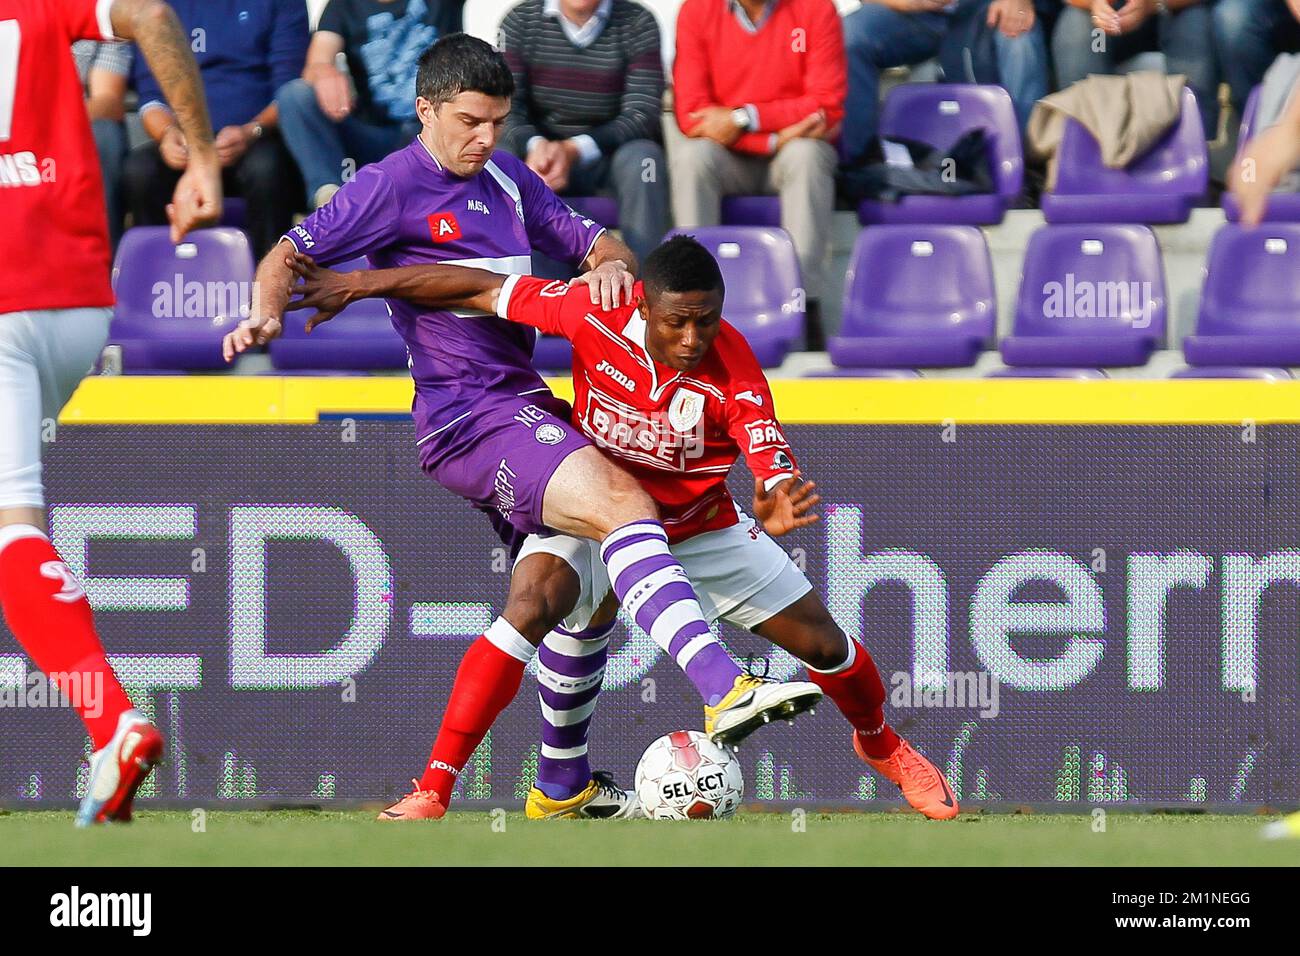 20120916 - ANTWERP, BELGIUM: Beerschot's Tomislav Mikulic and Brazilian Sarah Menezes fight for the ball during the Jupiler Pro League match between Beerschot AC and Standard de Liege, in Antwerp, Sunday 16 September 2012, on the 7th day of the Belgian soccer championship. BELGA PHOTO BRUNO FAHY Stock Photo